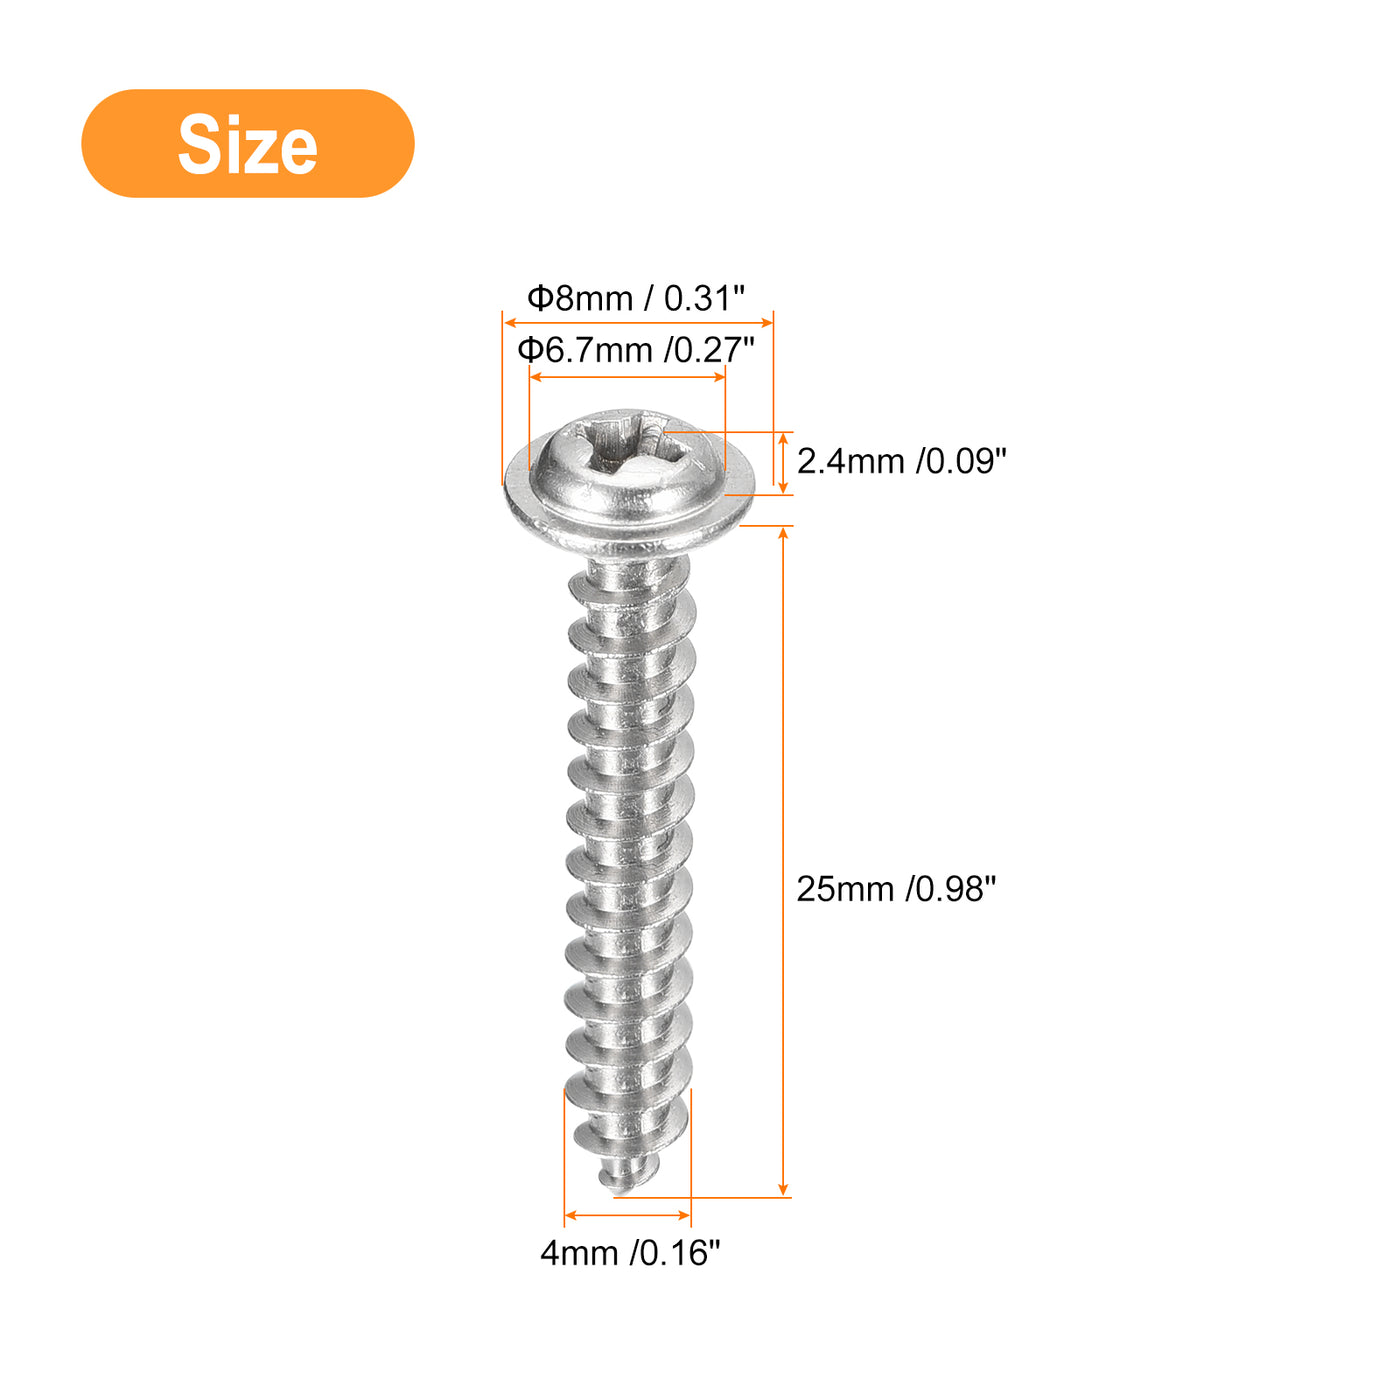 uxcell Uxcell ST4x25mm Phillips Pan Head Self-tapping Screw with Washer, 50pcs - 304 Stainless Steel Wood Screw Full Thread (Silver)